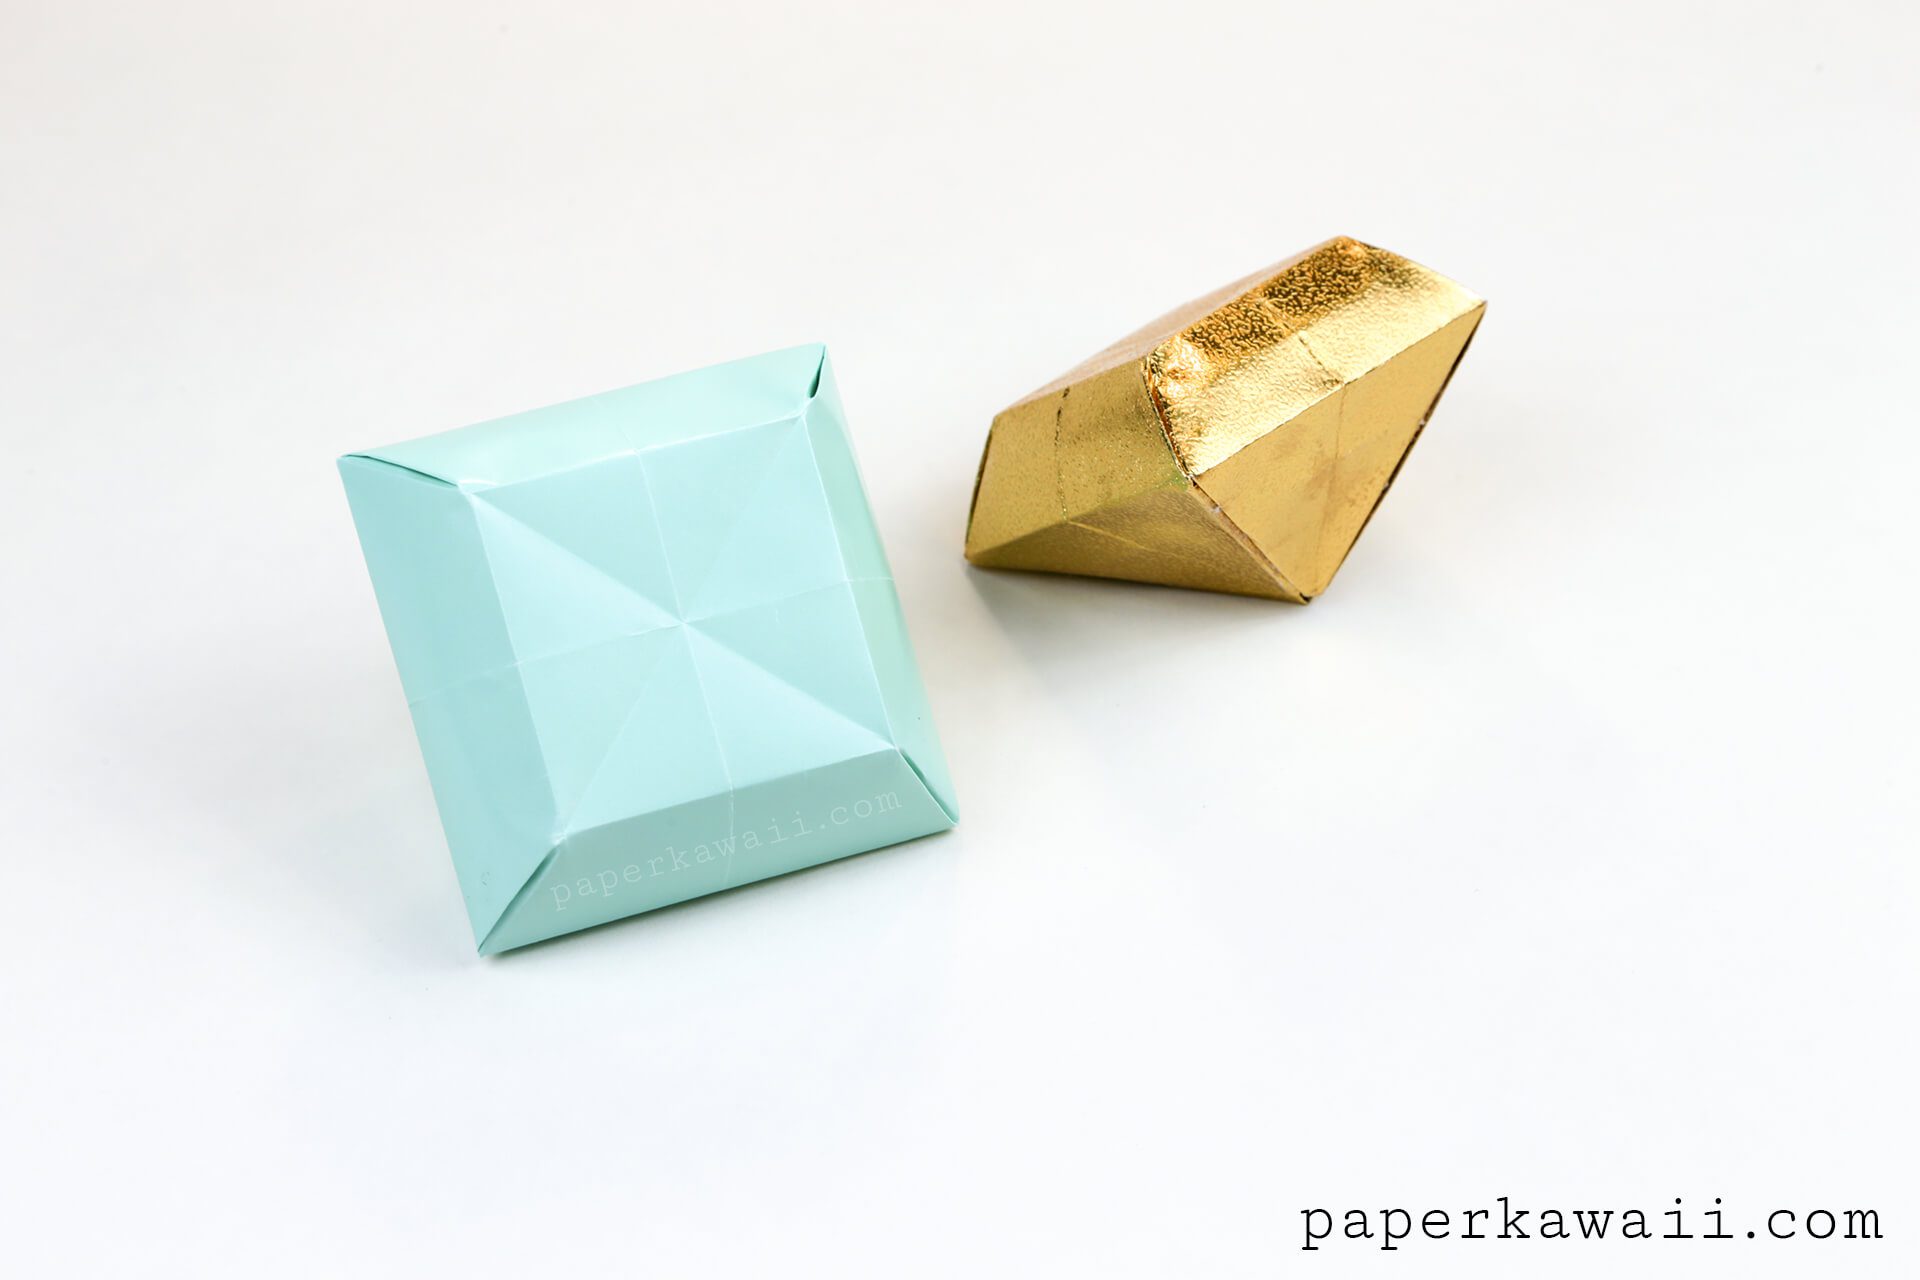 St Patrick's Day Pot of Gold made by Origami 